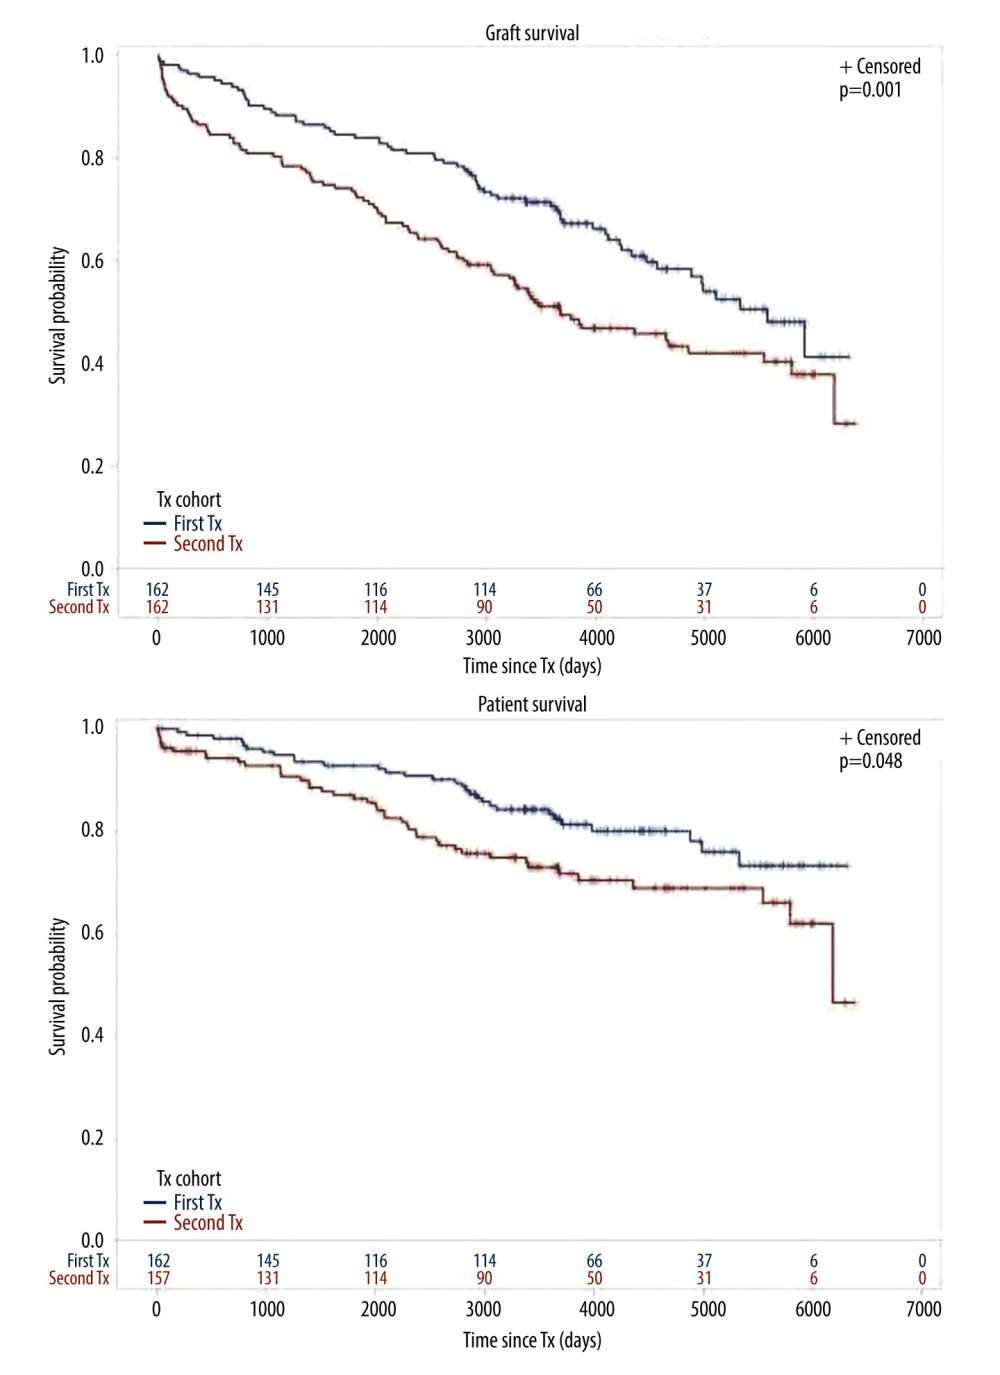 Cohort TX2 (162 patients after kidney re-transplantation) compared to TX1 (162 matched control patients after first transplantation)Graft survival (p<0.001), as well as patient survival (0.048) were significantly inferior in TX2 compared to TX1 patients.